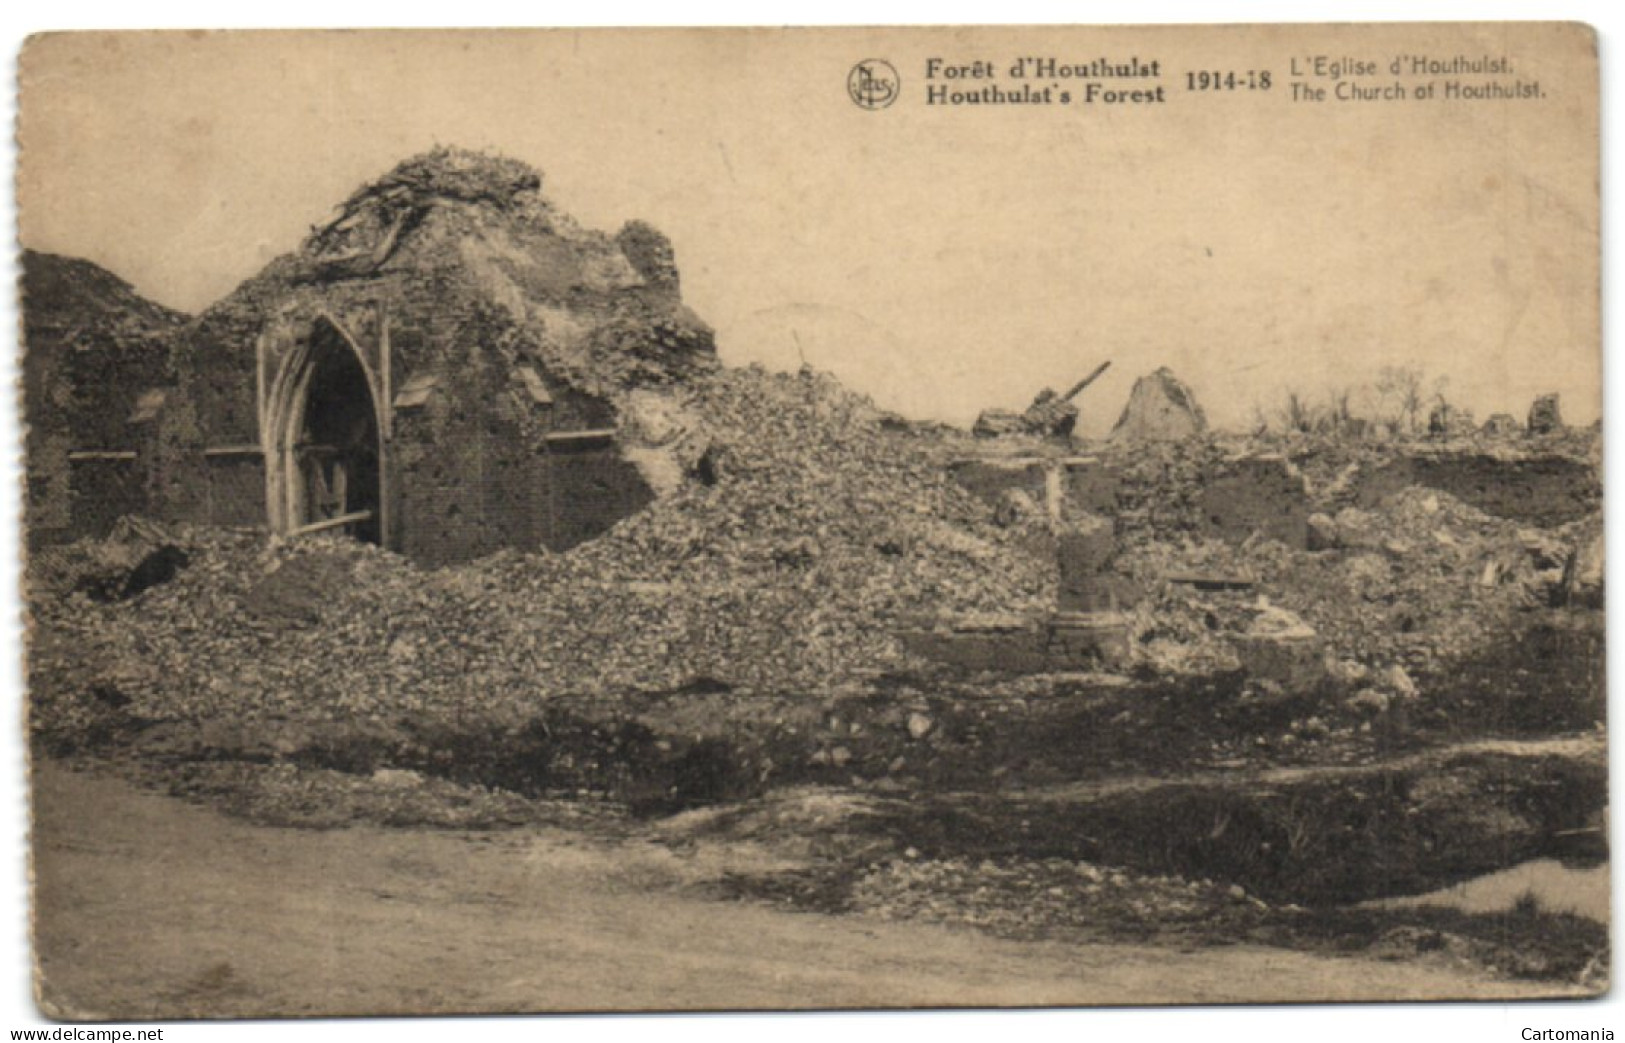 Forêt D'Houthulst - 1914-18 - L'Eglise D'Houthulst - Houthulst